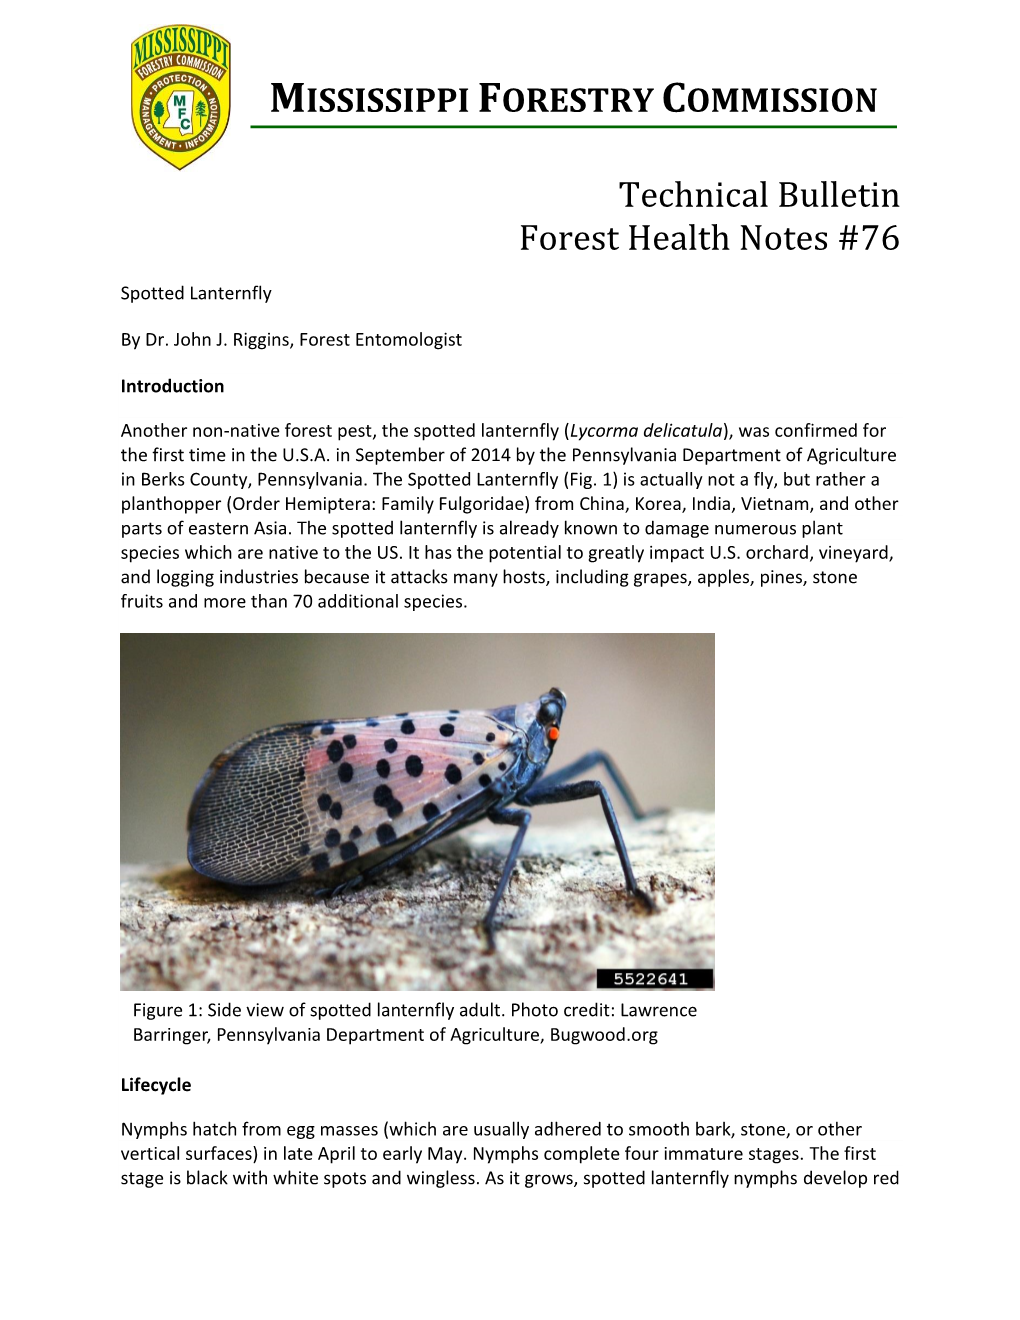 Technical Bulletin Forest Health Notes #76